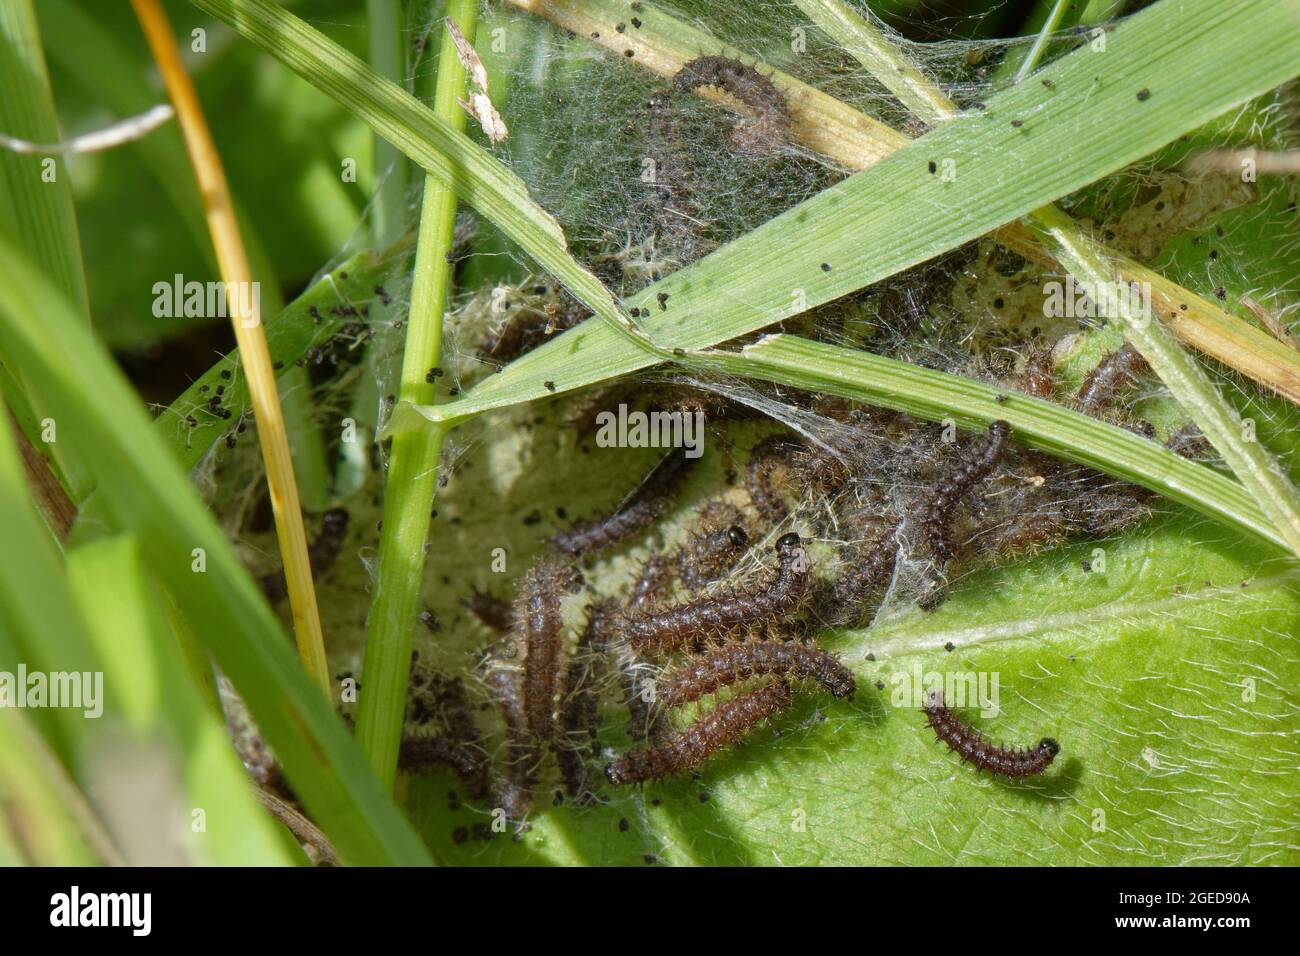 Seven week old Marsh fritillary (Euphydryas aurinia) caterpillars feeding on Devil's bit scabious (Succisa pratensis) leaves, their larval food plant. Stock Photo